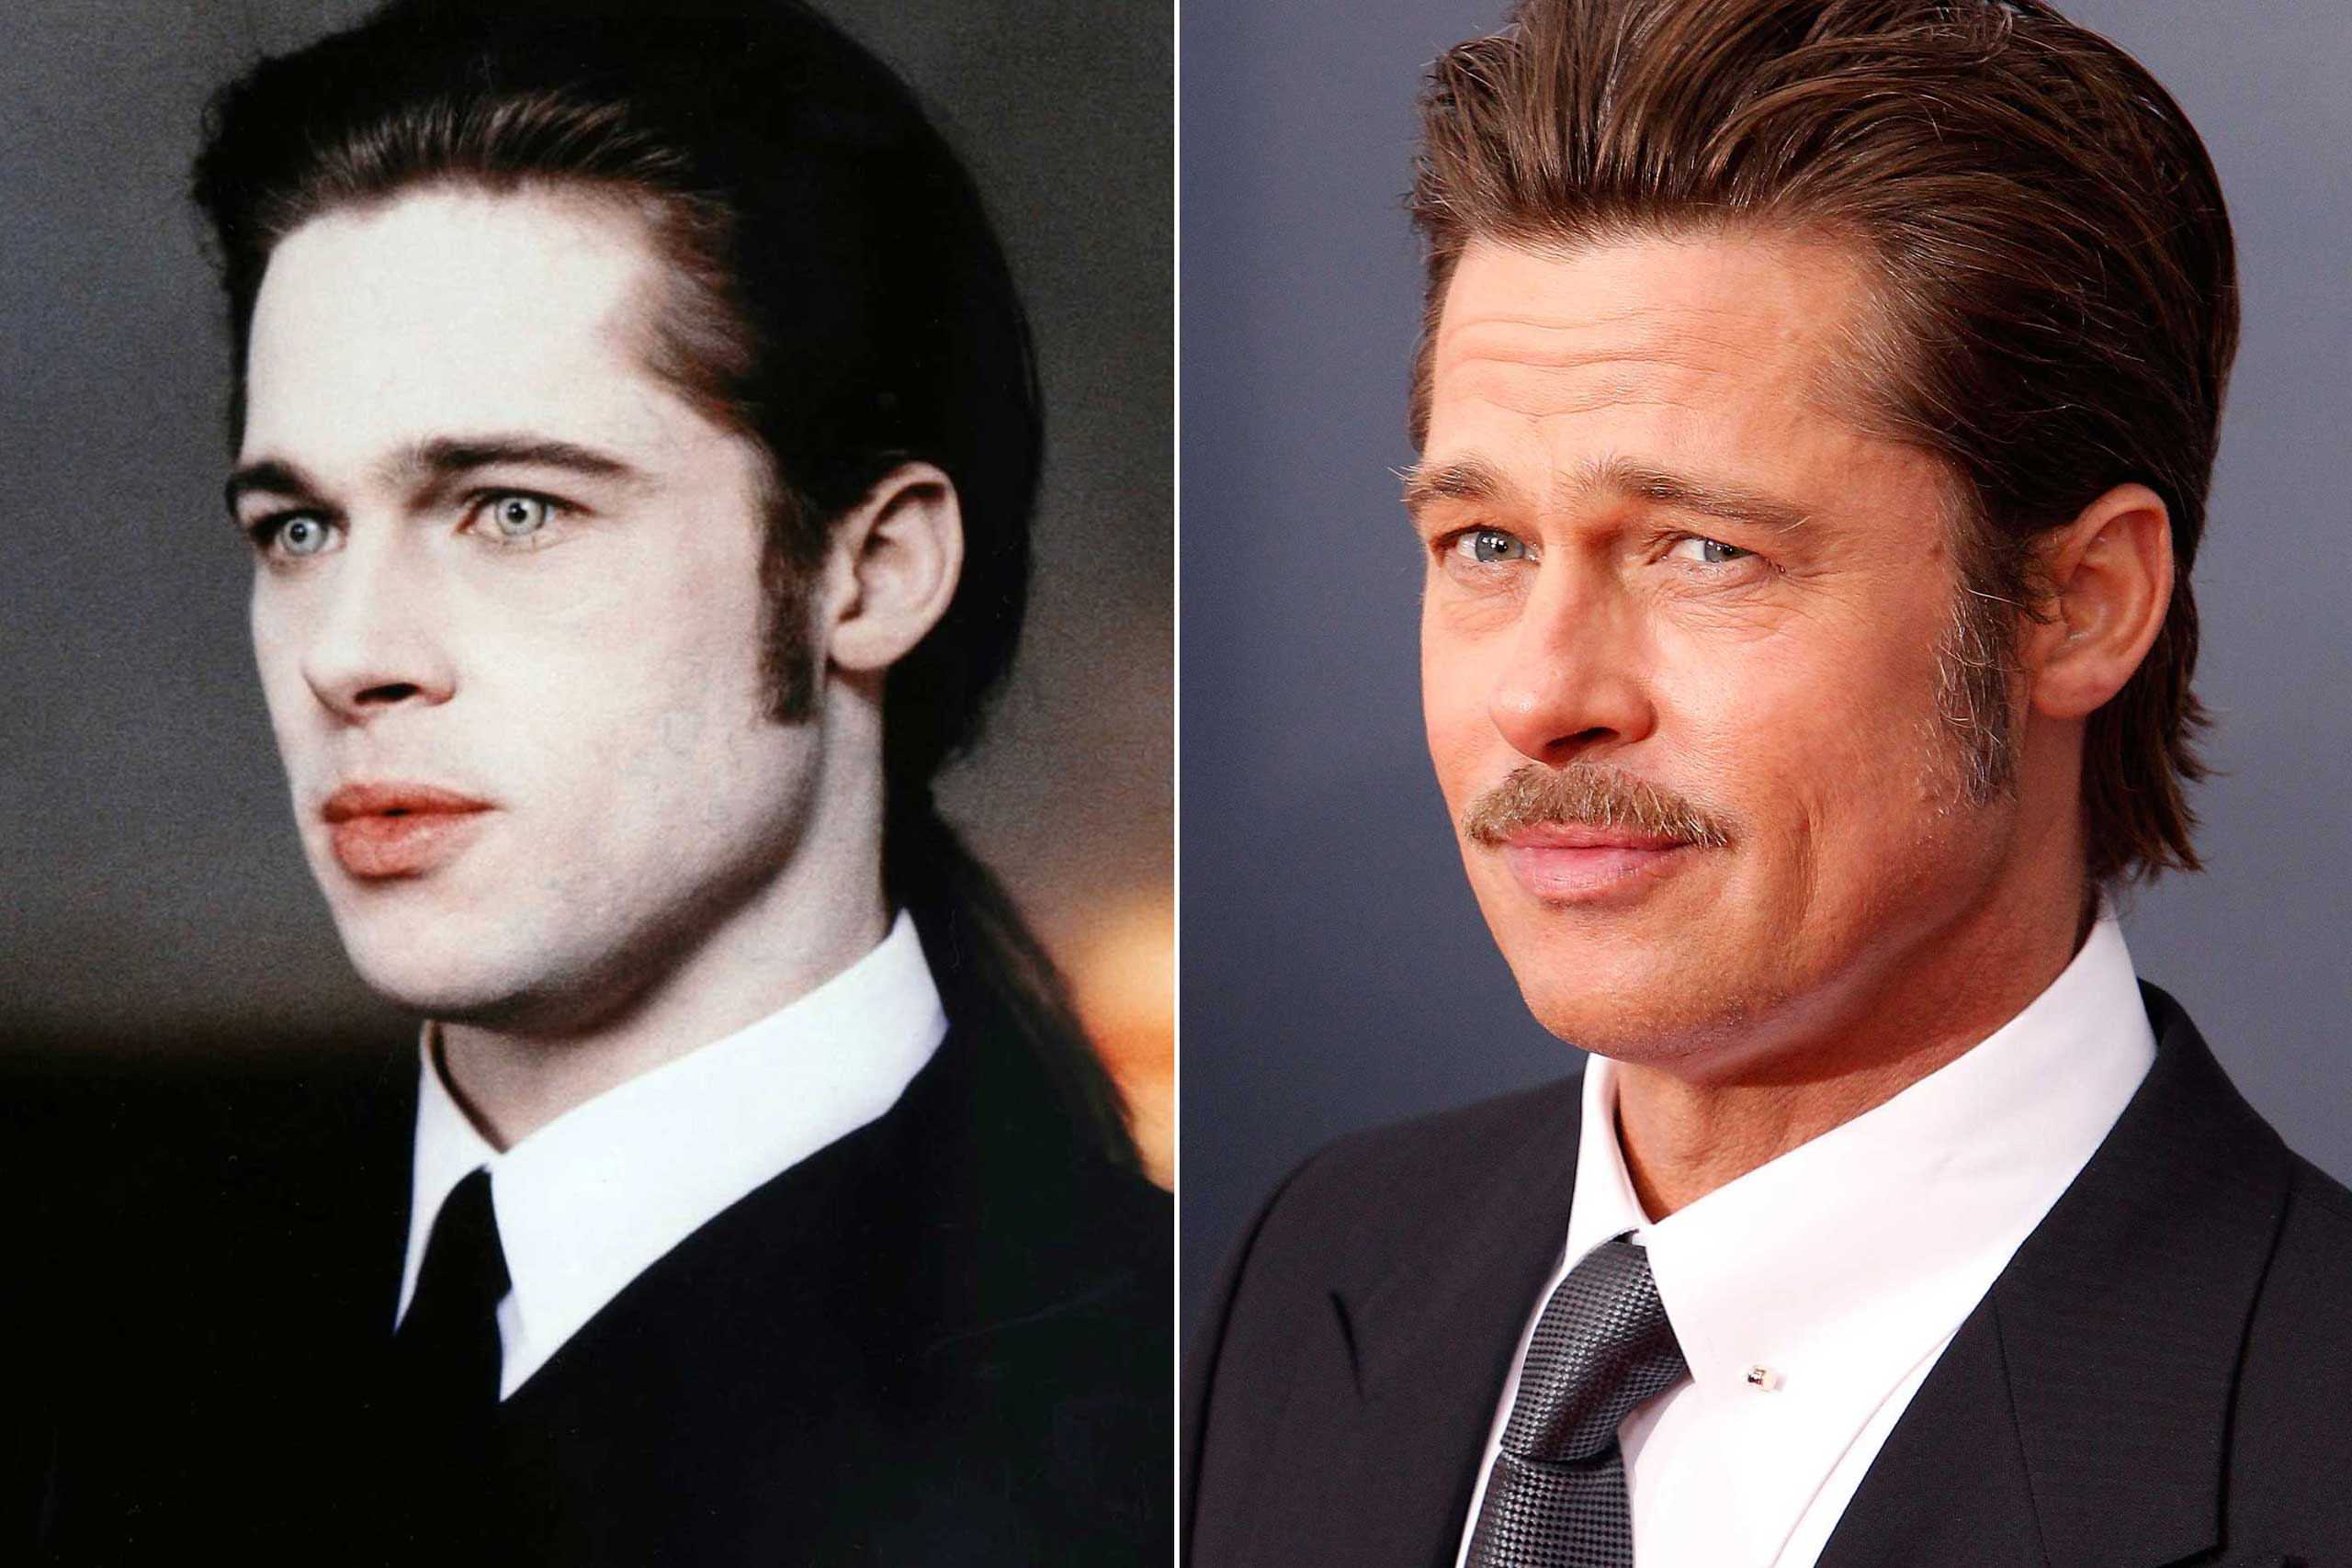 Brad Pitt: Before 1994, Pitt was a rising star thanks to A River Runs Through It and his brief role in Thelma &amp; Louise. But it was the one-two punch of Interview, in which he played the broody Louis, and Legends of the Fall that cemented him as his generation’s leading man; his first People Sexiest Man Alive cover came two months after he starred in Interview.
                              
                              He went on to superstardom of a not-very-interesting sort in movies like  The Mexican and Troy, but rediscovered his edge after his romantic partnership with Angelina Jolie, and recently won an Oscar for helping bring 12 Years a Slave to the screen.